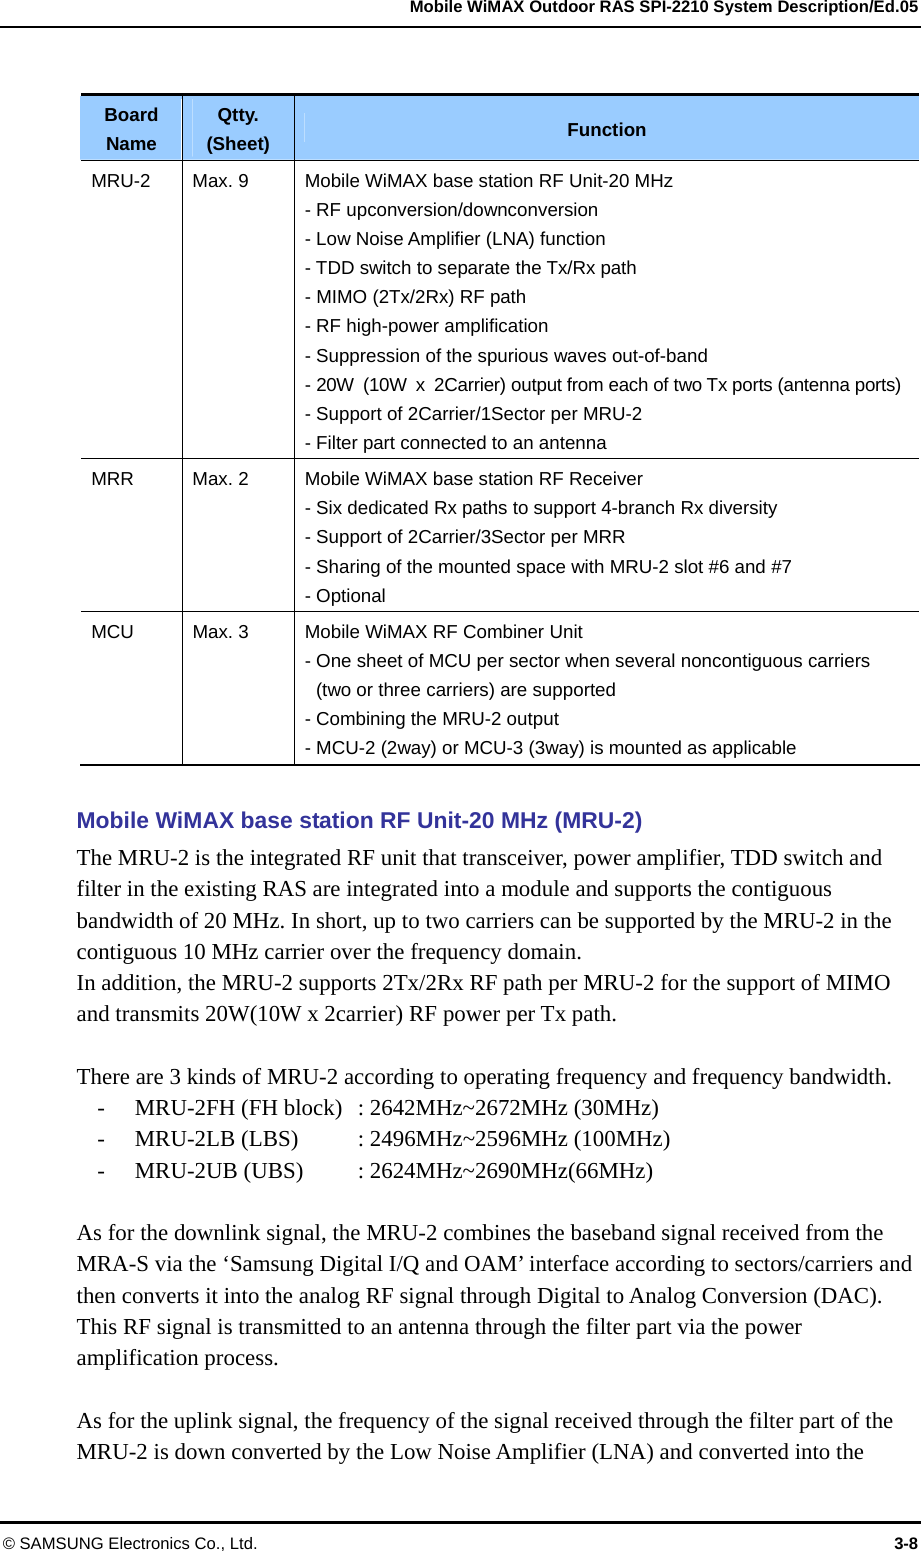   Mobile WiMAX Outdoor RAS SPI-2210 System Description/Ed.05 © SAMSUNG Electronics Co., Ltd.  3-8  Board Name Qtty. (Sheet) Function MRU-2  Max. 9  Mobile WiMAX base station RF Unit-20 MHz - RF upconversion/downconversion - Low Noise Amplifier (LNA) function   - TDD switch to separate the Tx/Rx path - MIMO (2Tx/2Rx) RF path   - RF high-power amplification - Suppression of the spurious waves out-of-band - 20W  (10W  x  2Carrier) output from each of two Tx ports (antenna ports)- Support of 2Carrier/1Sector per MRU-2 - Filter part connected to an antenna   MRR  Max. 2  Mobile WiMAX base station RF Receiver - Six dedicated Rx paths to support 4-branch Rx diversity - Support of 2Carrier/3Sector per MRR   - Sharing of the mounted space with MRU-2 slot #6 and #7   - Optional MCU  Max. 3  Mobile WiMAX RF Combiner Unit - One sheet of MCU per sector when several noncontiguous carriers (two or three carriers) are supported - Combining the MRU-2 output - MCU-2 (2way) or MCU-3 (3way) is mounted as applicable  Mobile WiMAX base station RF Unit-20 MHz (MRU-2) The MRU-2 is the integrated RF unit that transceiver, power amplifier, TDD switch and filter in the existing RAS are integrated into a module and supports the contiguous bandwidth of 20 MHz. In short, up to two carriers can be supported by the MRU-2 in the contiguous 10 MHz carrier over the frequency domain.   In addition, the MRU-2 supports 2Tx/2Rx RF path per MRU-2 for the support of MIMO and transmits 20W(10W x 2carrier) RF power per Tx path.    There are 3 kinds of MRU-2 according to operating frequency and frequency bandwidth. - MRU-2FH (FH block)  : 2642MHz~2672MHz (30MHz) - MRU-2LB (LBS)    : 2496MHz~2596MHz (100MHz) - MRU-2UB (UBS)    : 2624MHz~2690MHz(66MHz)    As for the downlink signal, the MRU-2 combines the baseband signal received from the MRA-S via the ‘Samsung Digital I/Q and OAM’ interface according to sectors/carriers and then converts it into the analog RF signal through Digital to Analog Conversion (DAC). This RF signal is transmitted to an antenna through the filter part via the power amplification process.  As for the uplink signal, the frequency of the signal received through the filter part of the MRU-2 is down converted by the Low Noise Amplifier (LNA) and converted into the 